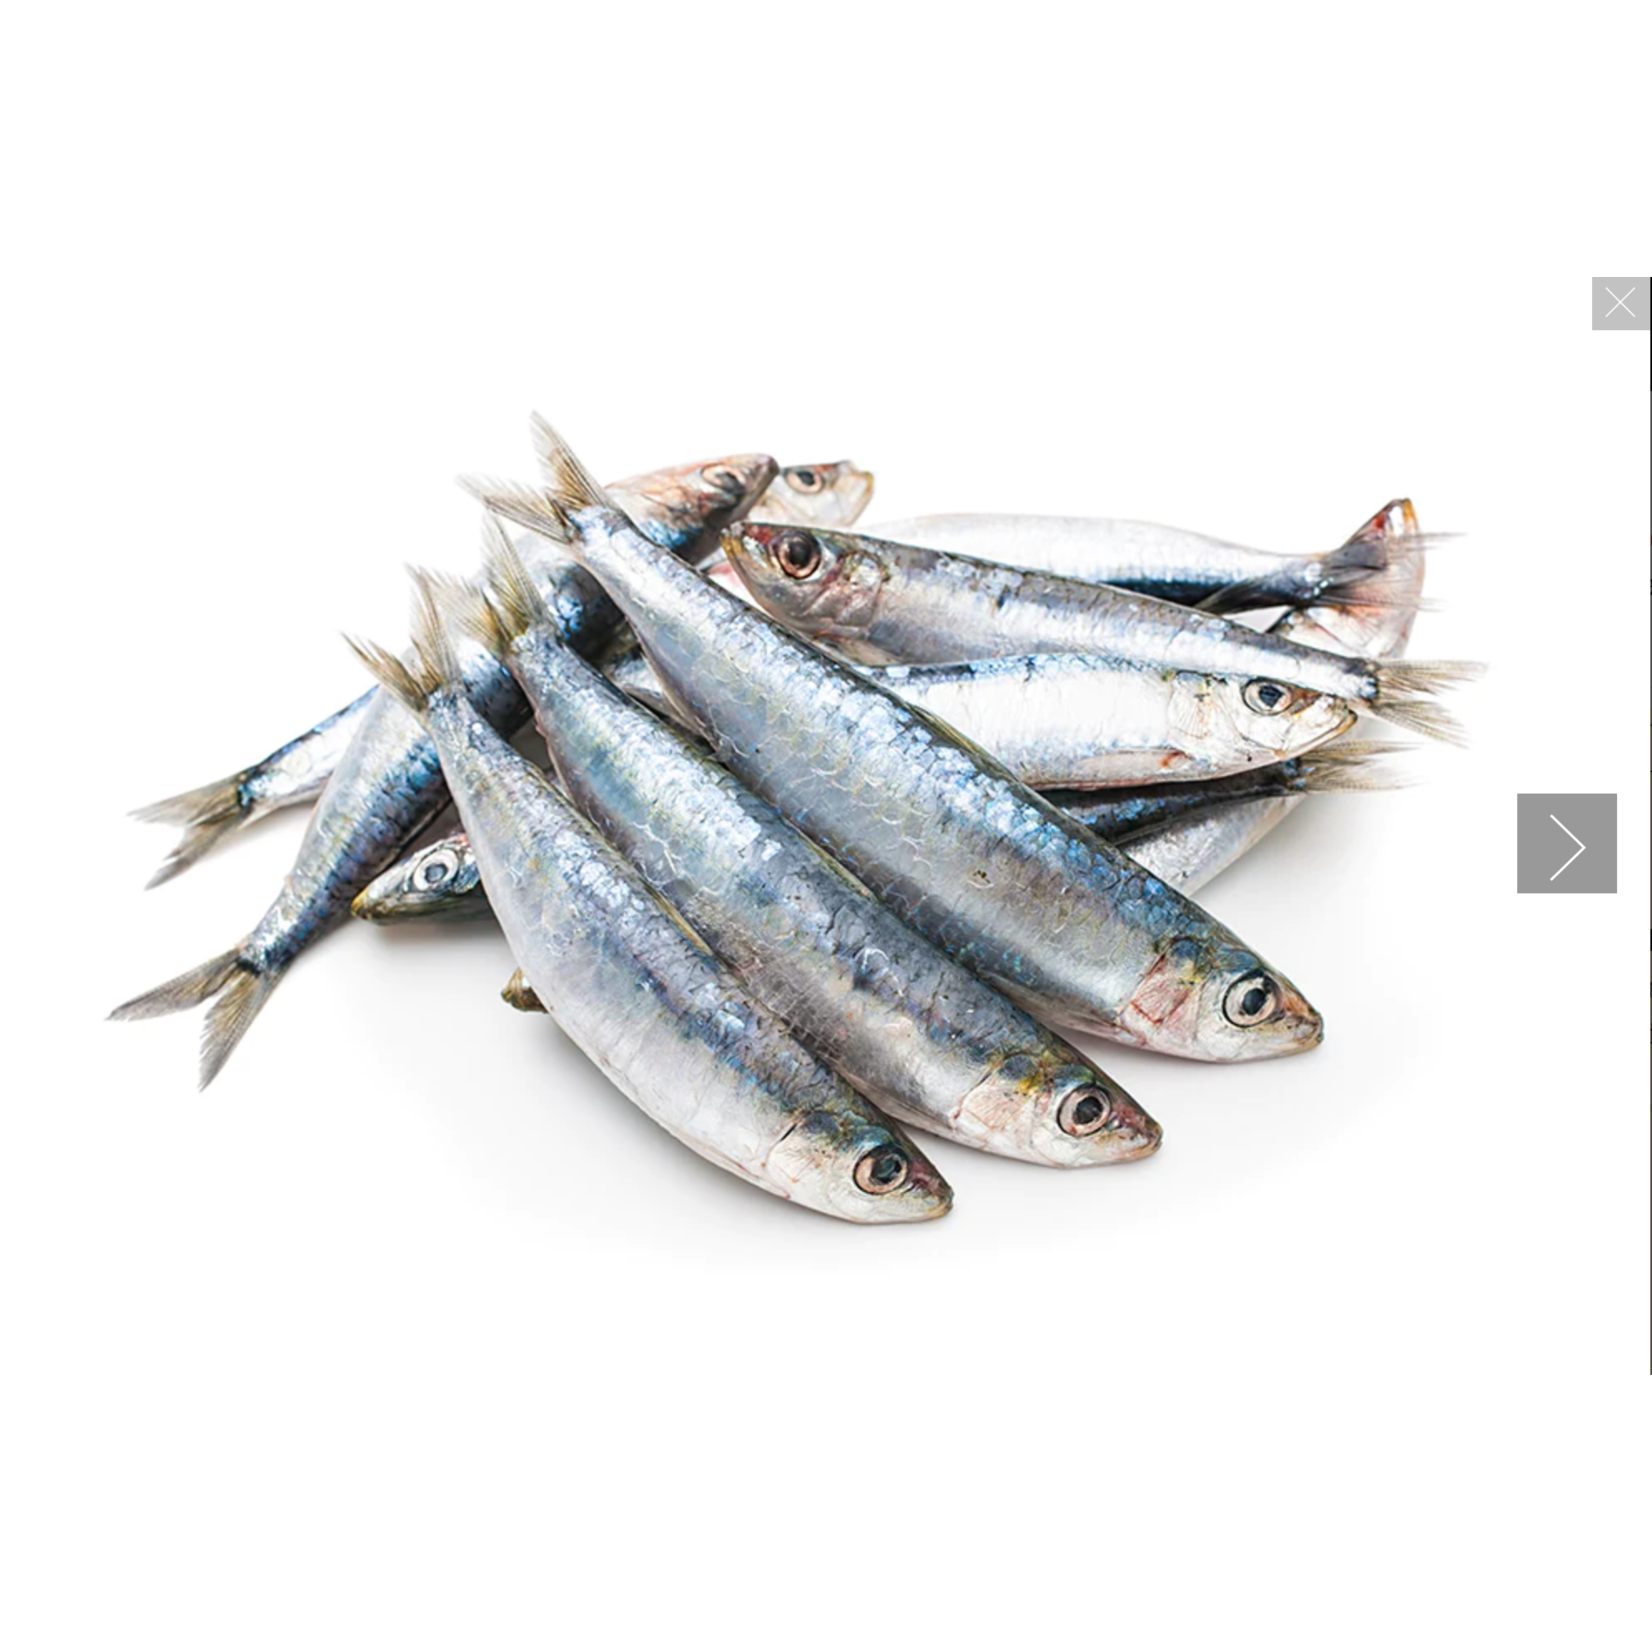 AVAILABLE IN-STORE Iron Will Raw frozen Sardines 1lb